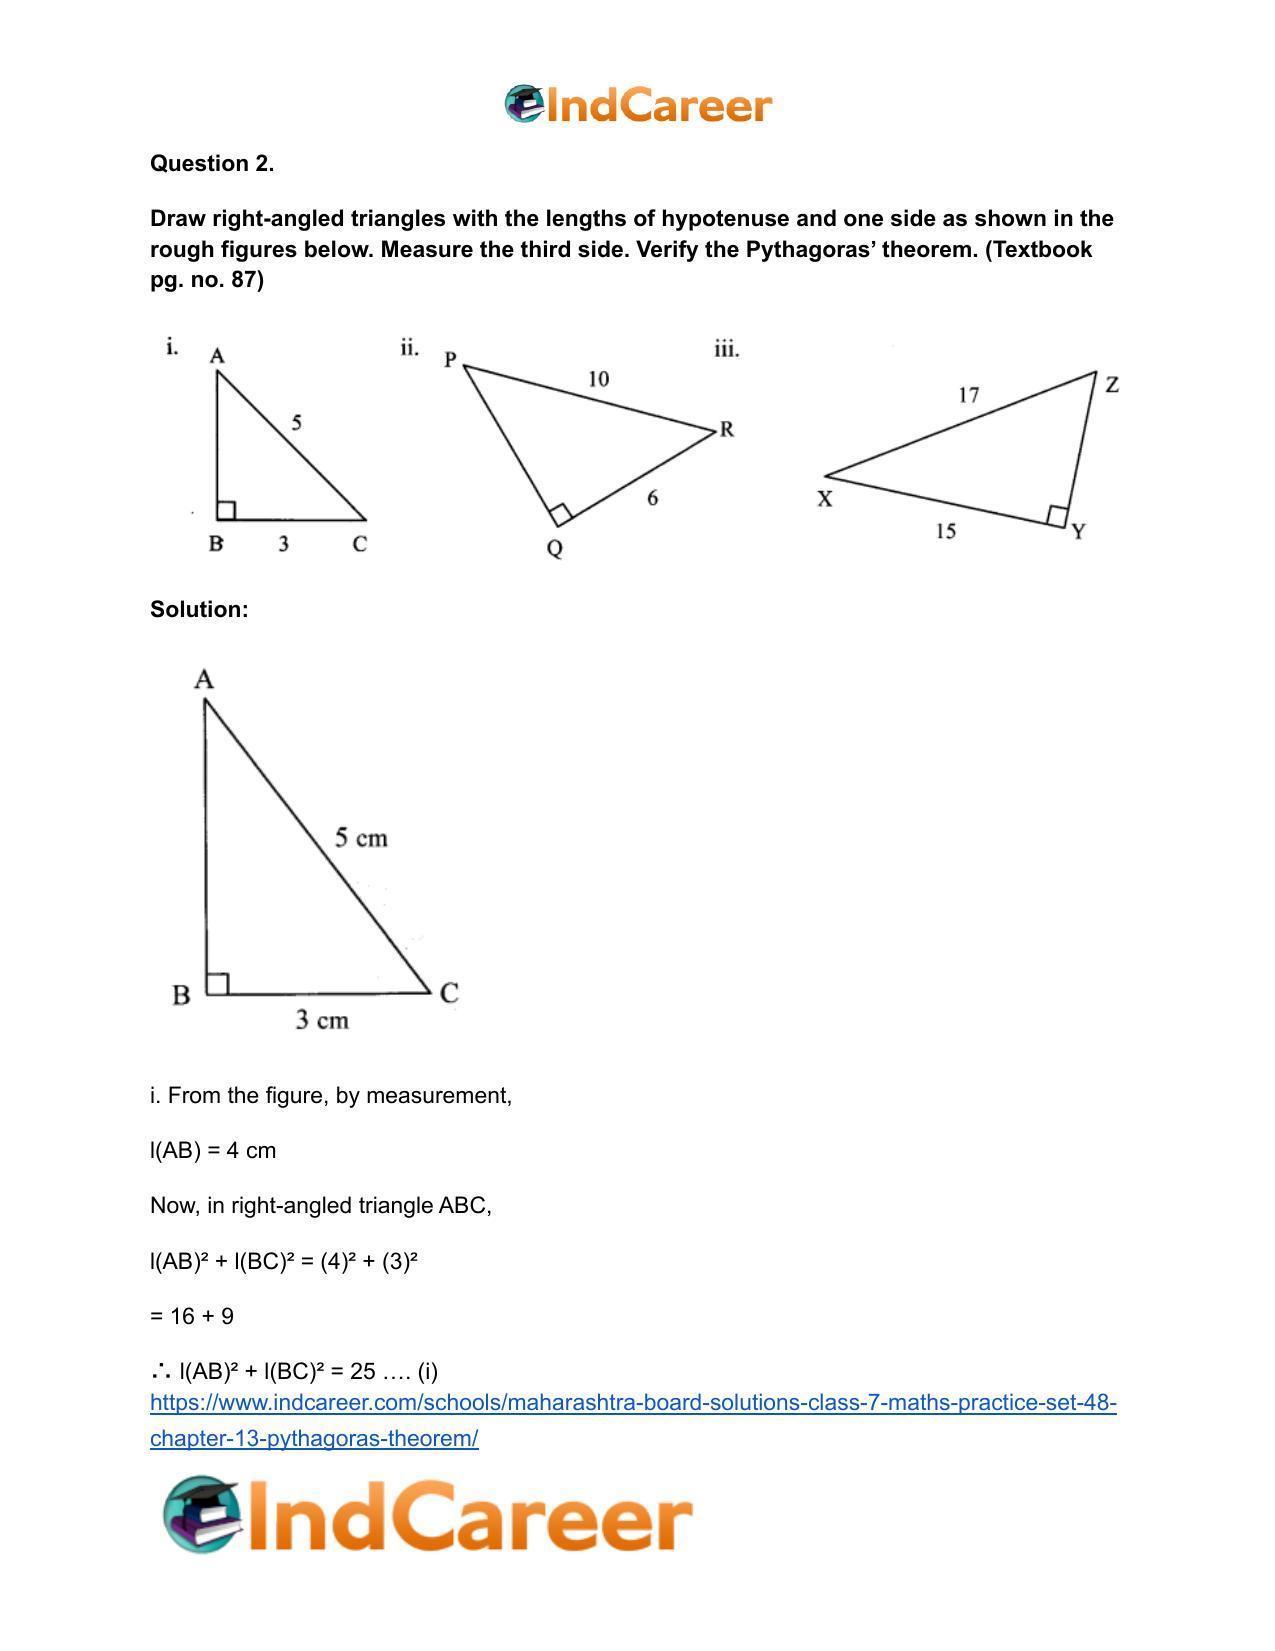 Maharashtra Board Solutions Class 7-Maths (Practice Set 48): Chapter 13- Pythagoras Theorem - Page 8